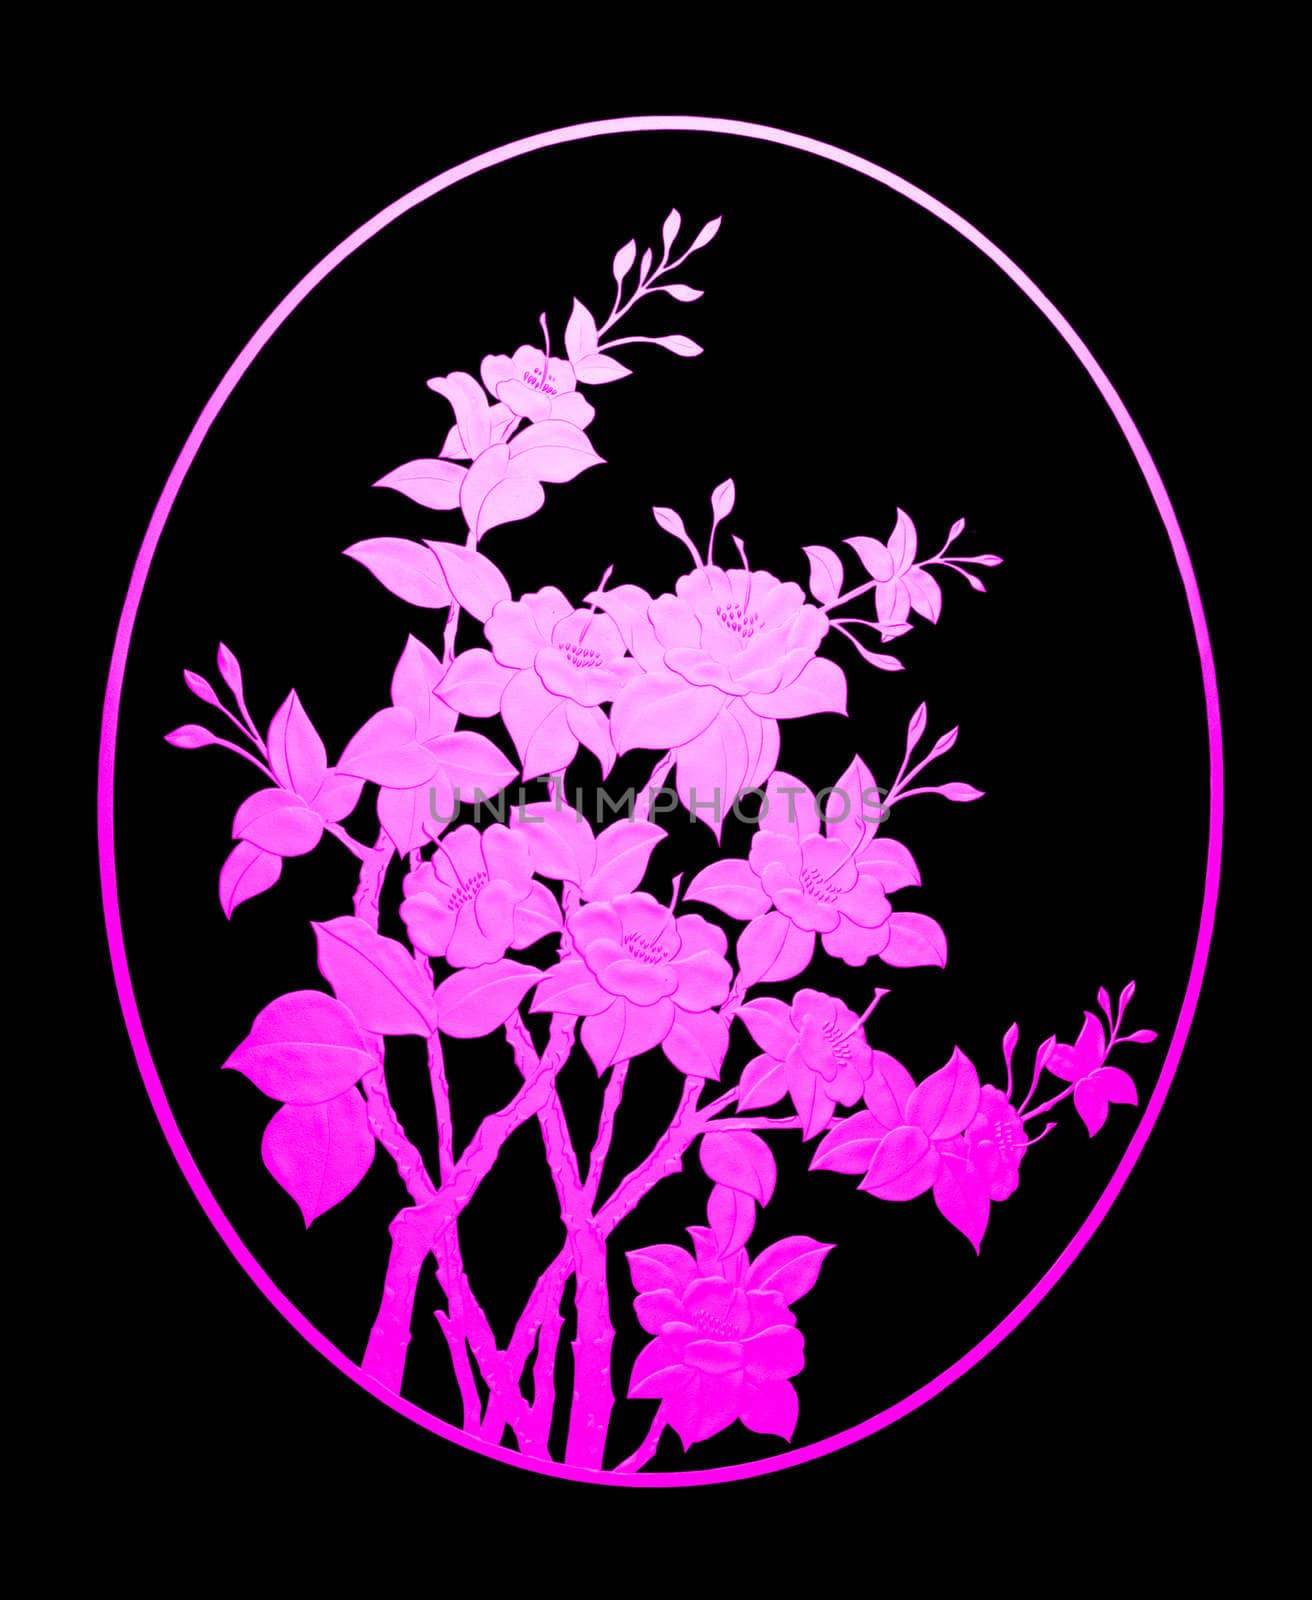 Pattern pink flower of glass on black background, clipping path